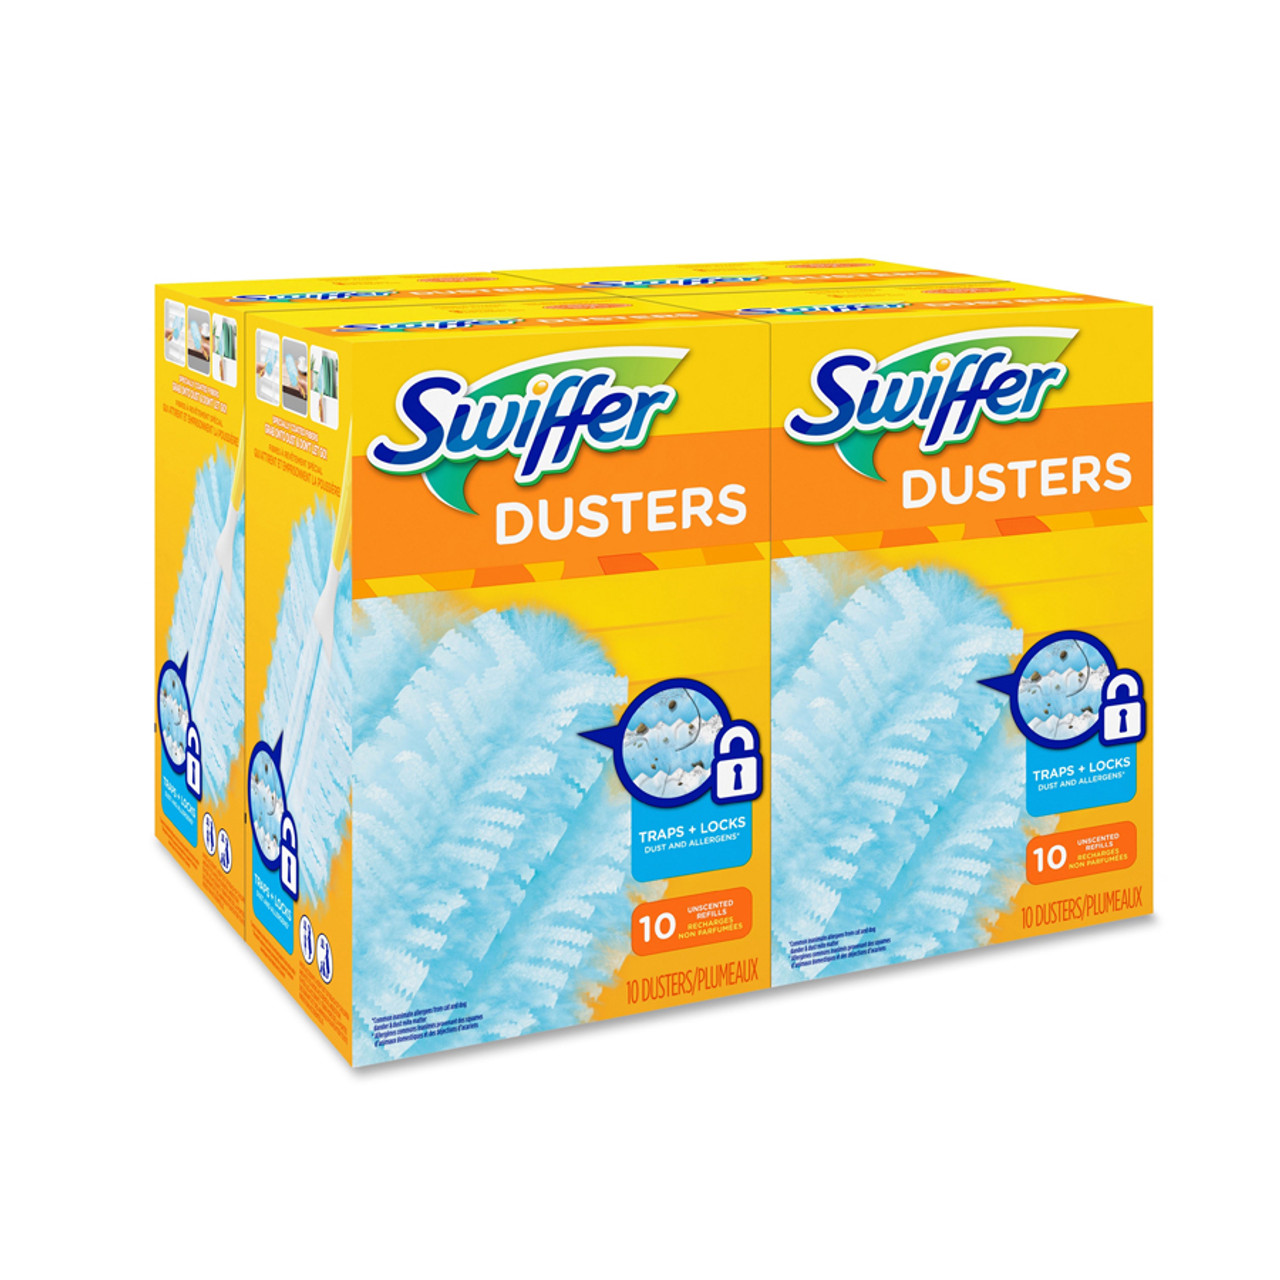 Swiffer Recharges plumeaux - 360° Duster 